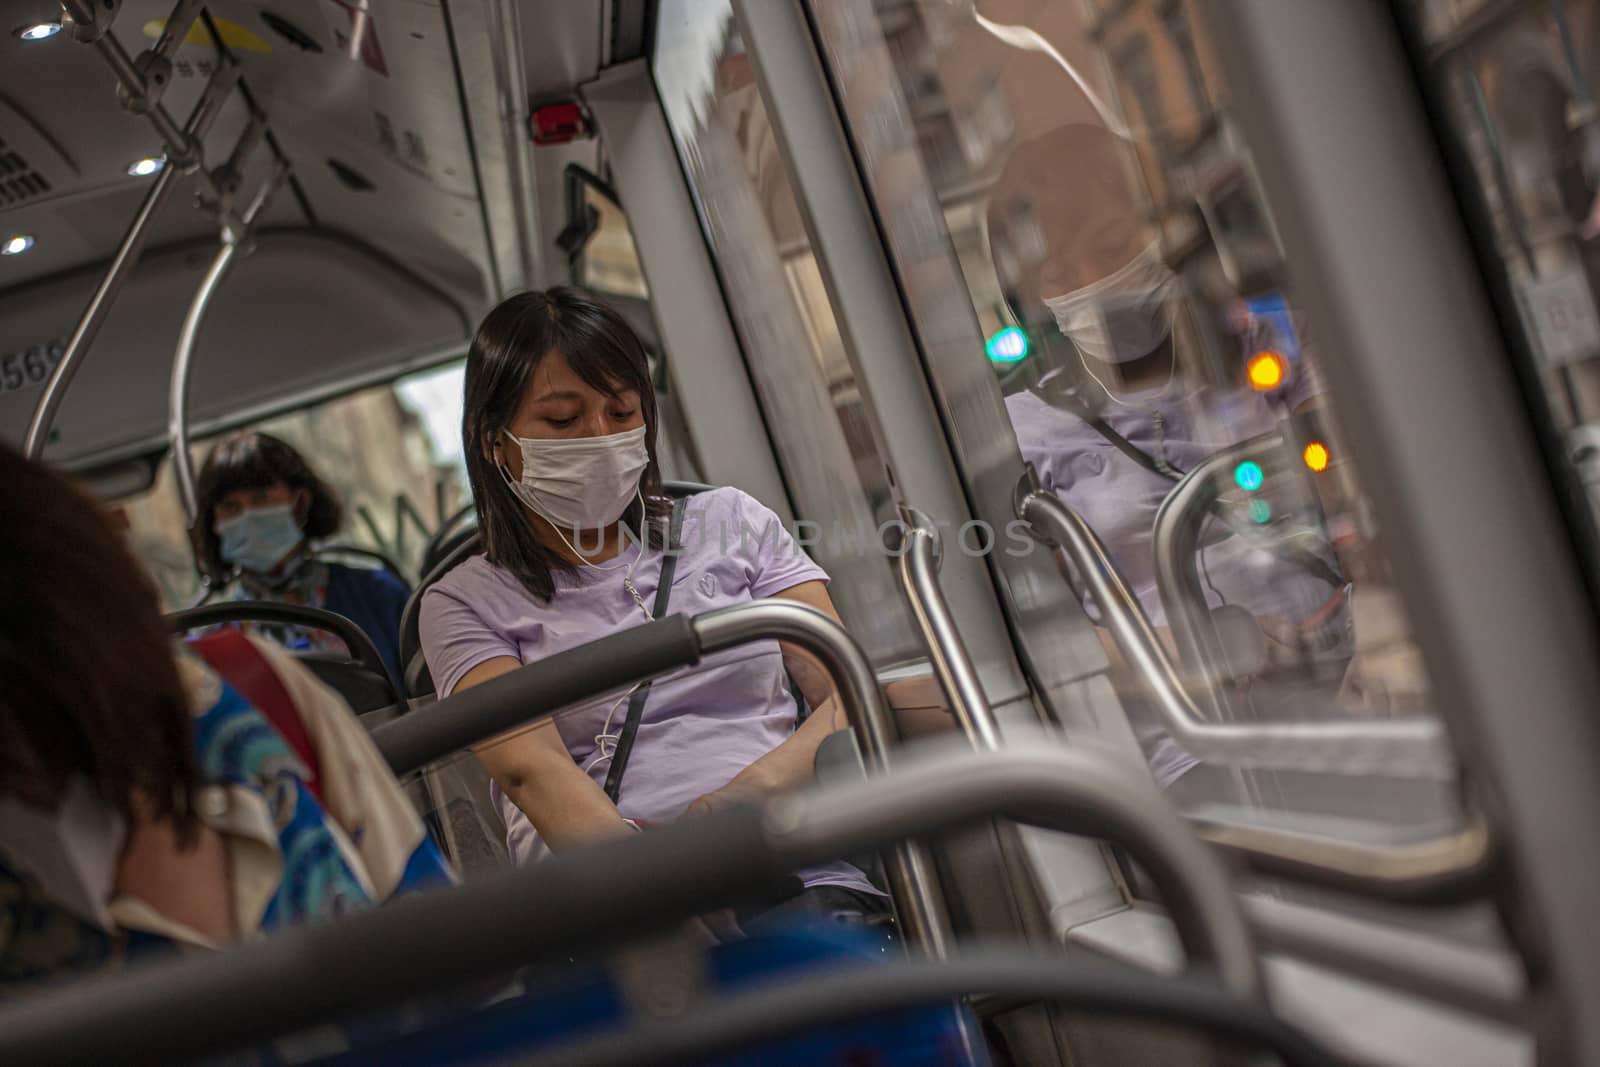 Girl in the bus with medical mask during Covid quarantine by pippocarlot